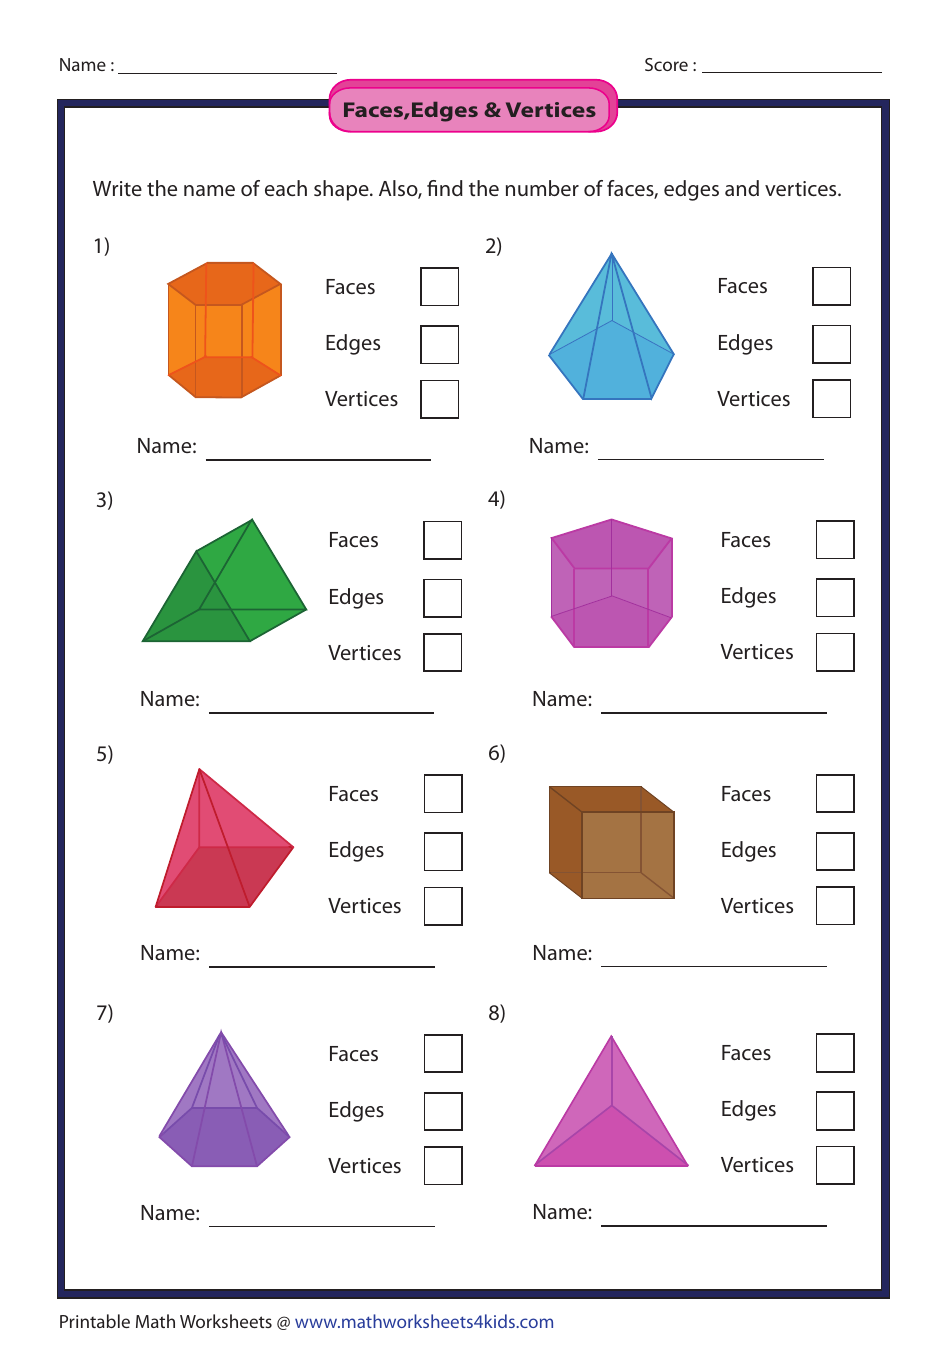 Faces, Edges & Vertices Worksheet With Answers Download ...